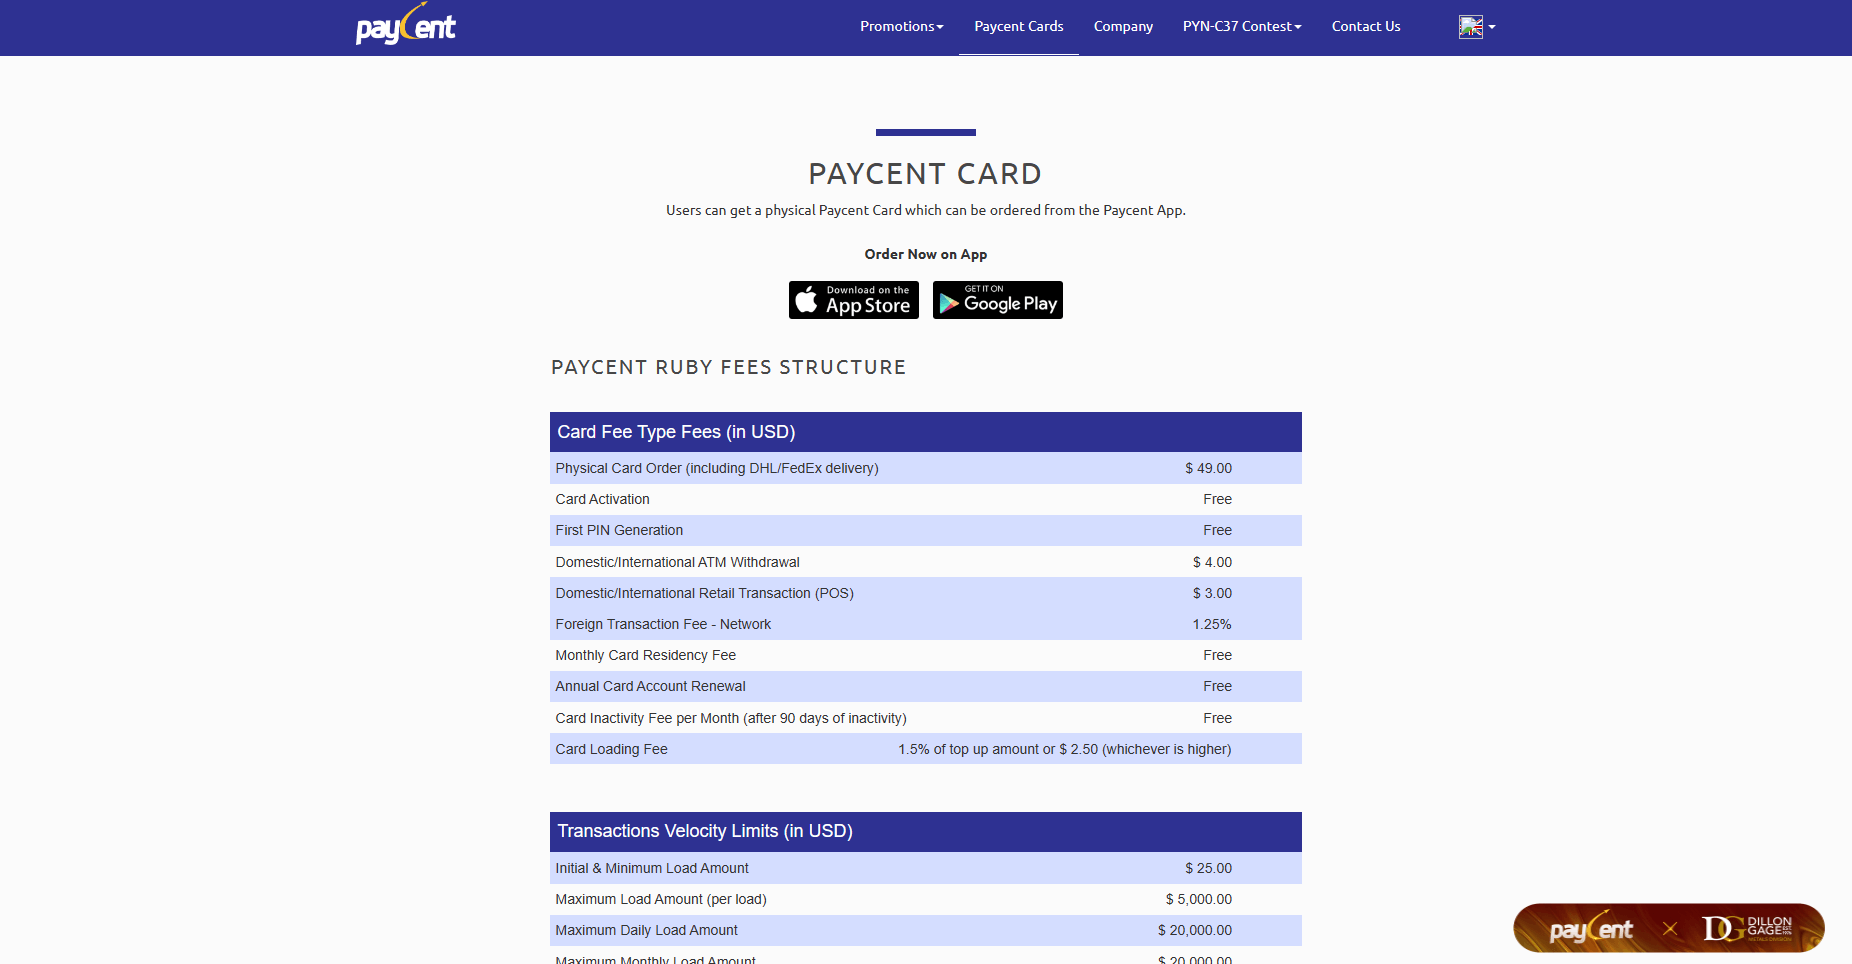 Paycent Card